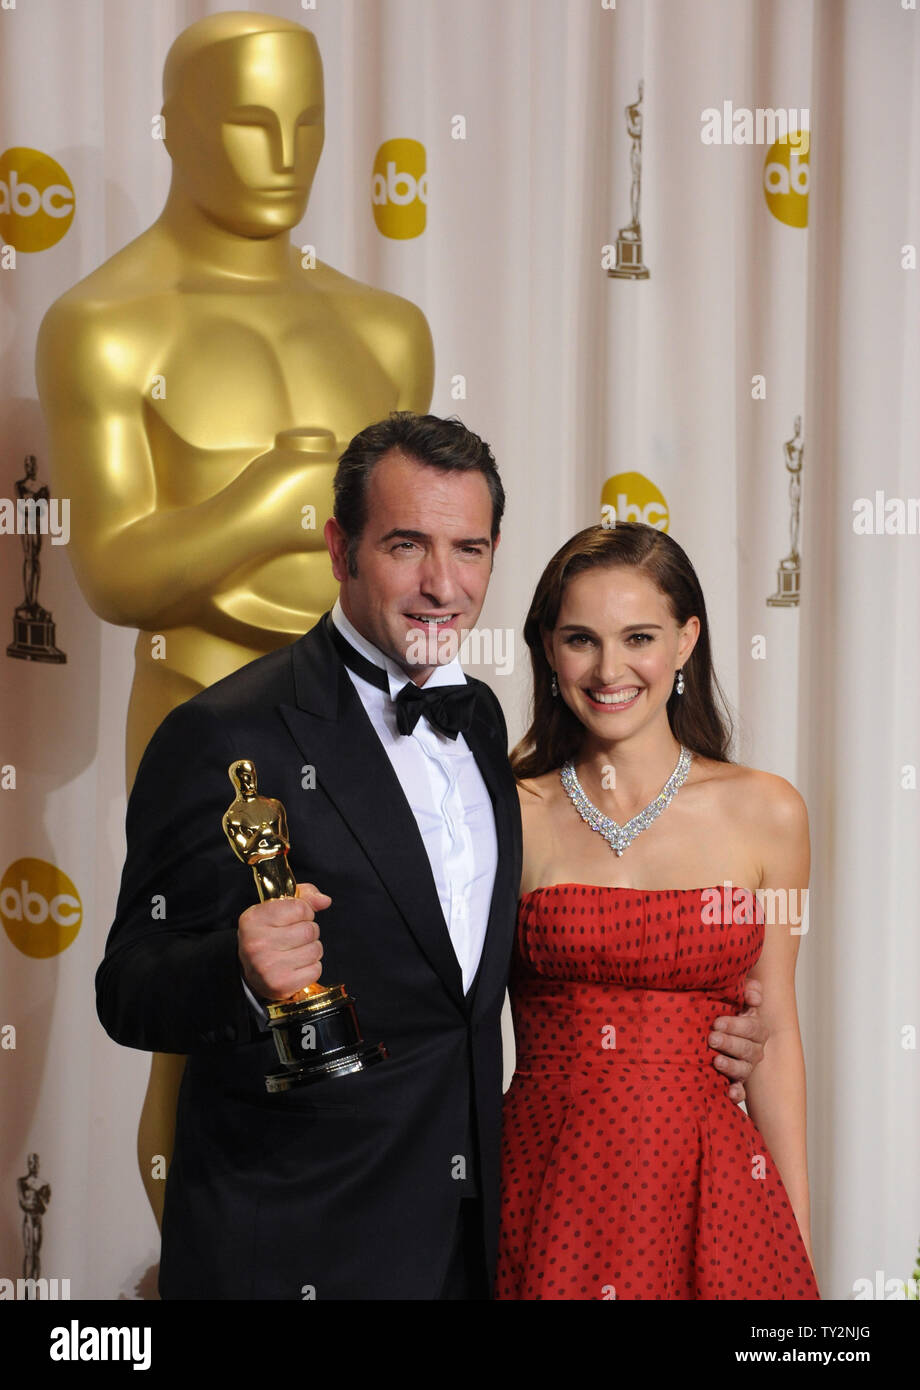 Best Actor Jean Dujardin for the movie "The Artist" appears with presenter  Natalie Portman backstage at the 84th Academy Awards at the Hollywood and  Highlands Center in Los Angeles on February 26,